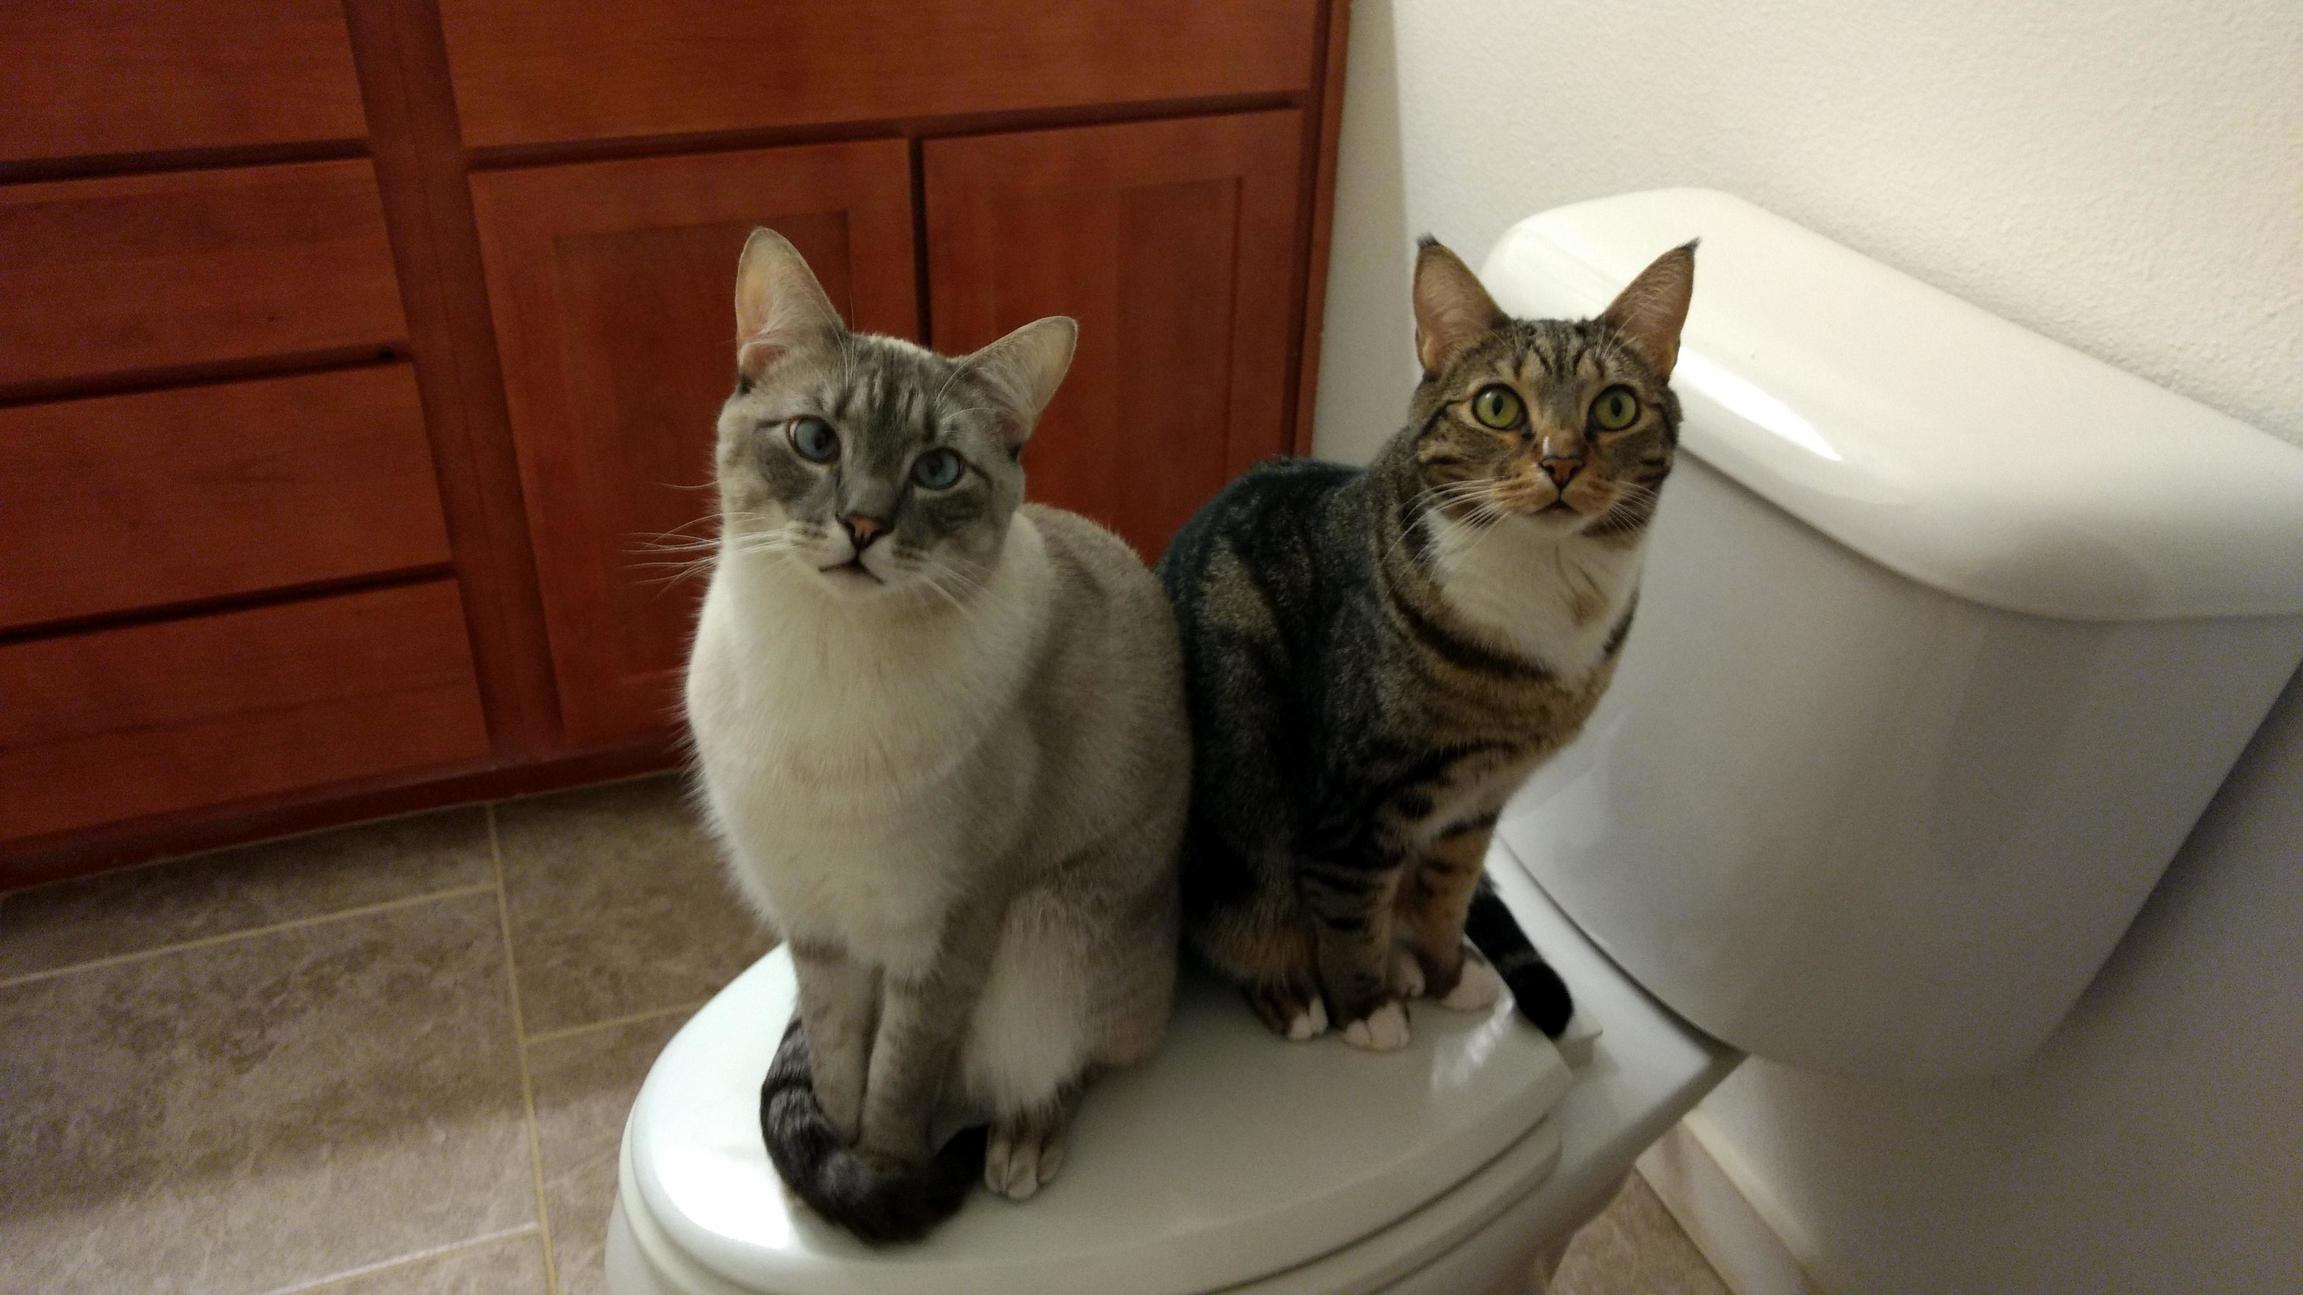 This is how they wait for me in the morning to finish my shower.